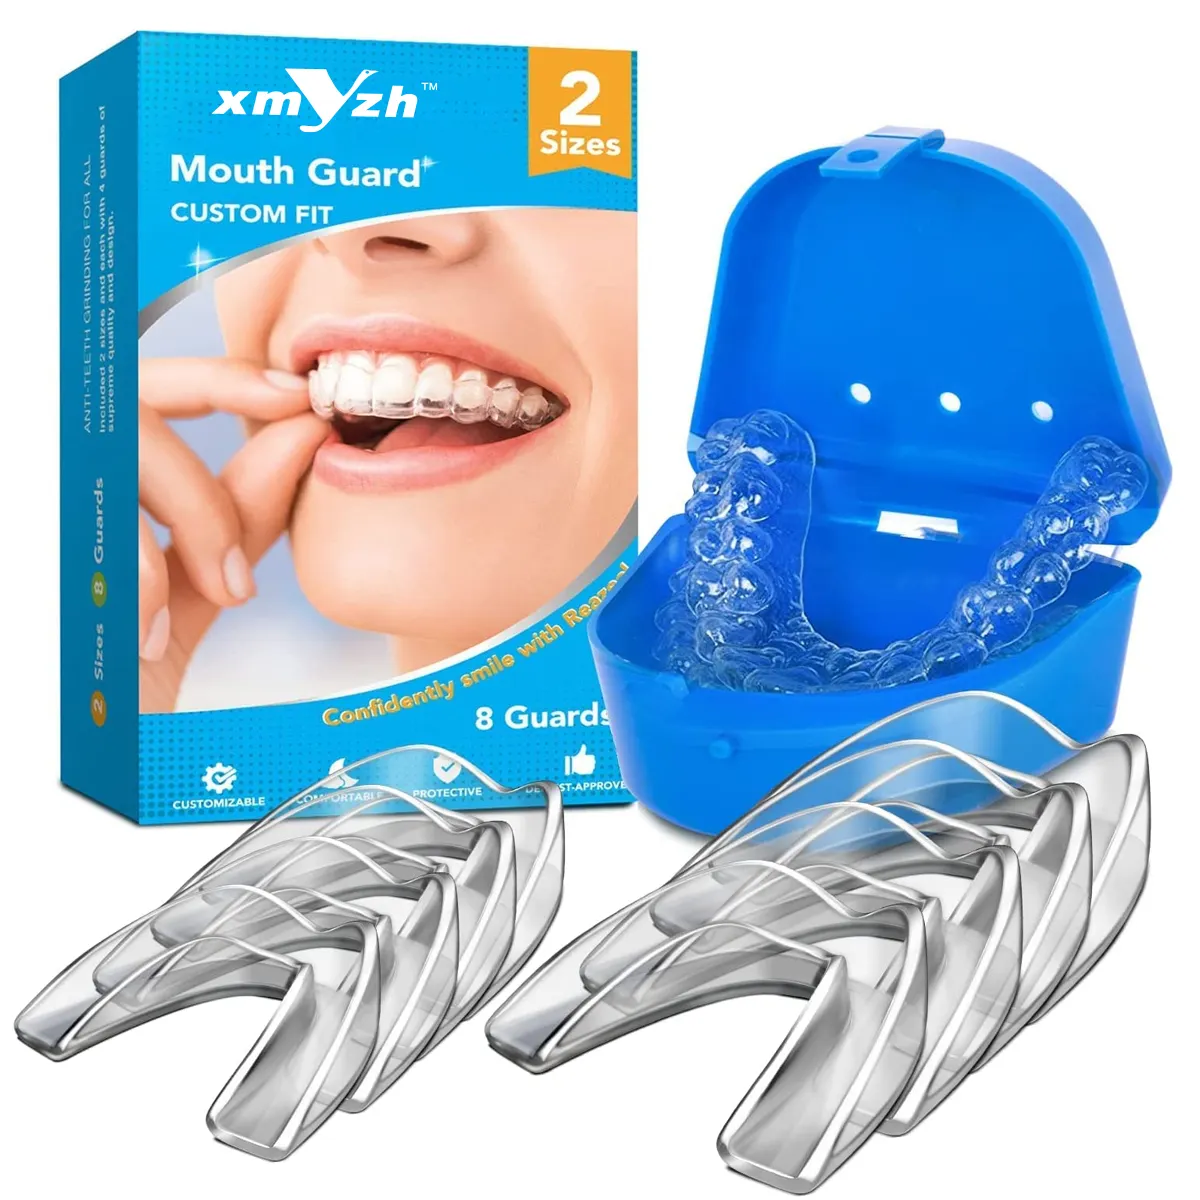 Hot Health Care Mouthpiece Anti Snoring Device Sleeping Aid Mouthguard Silicone Sleeping Mouth Guard with Case Box